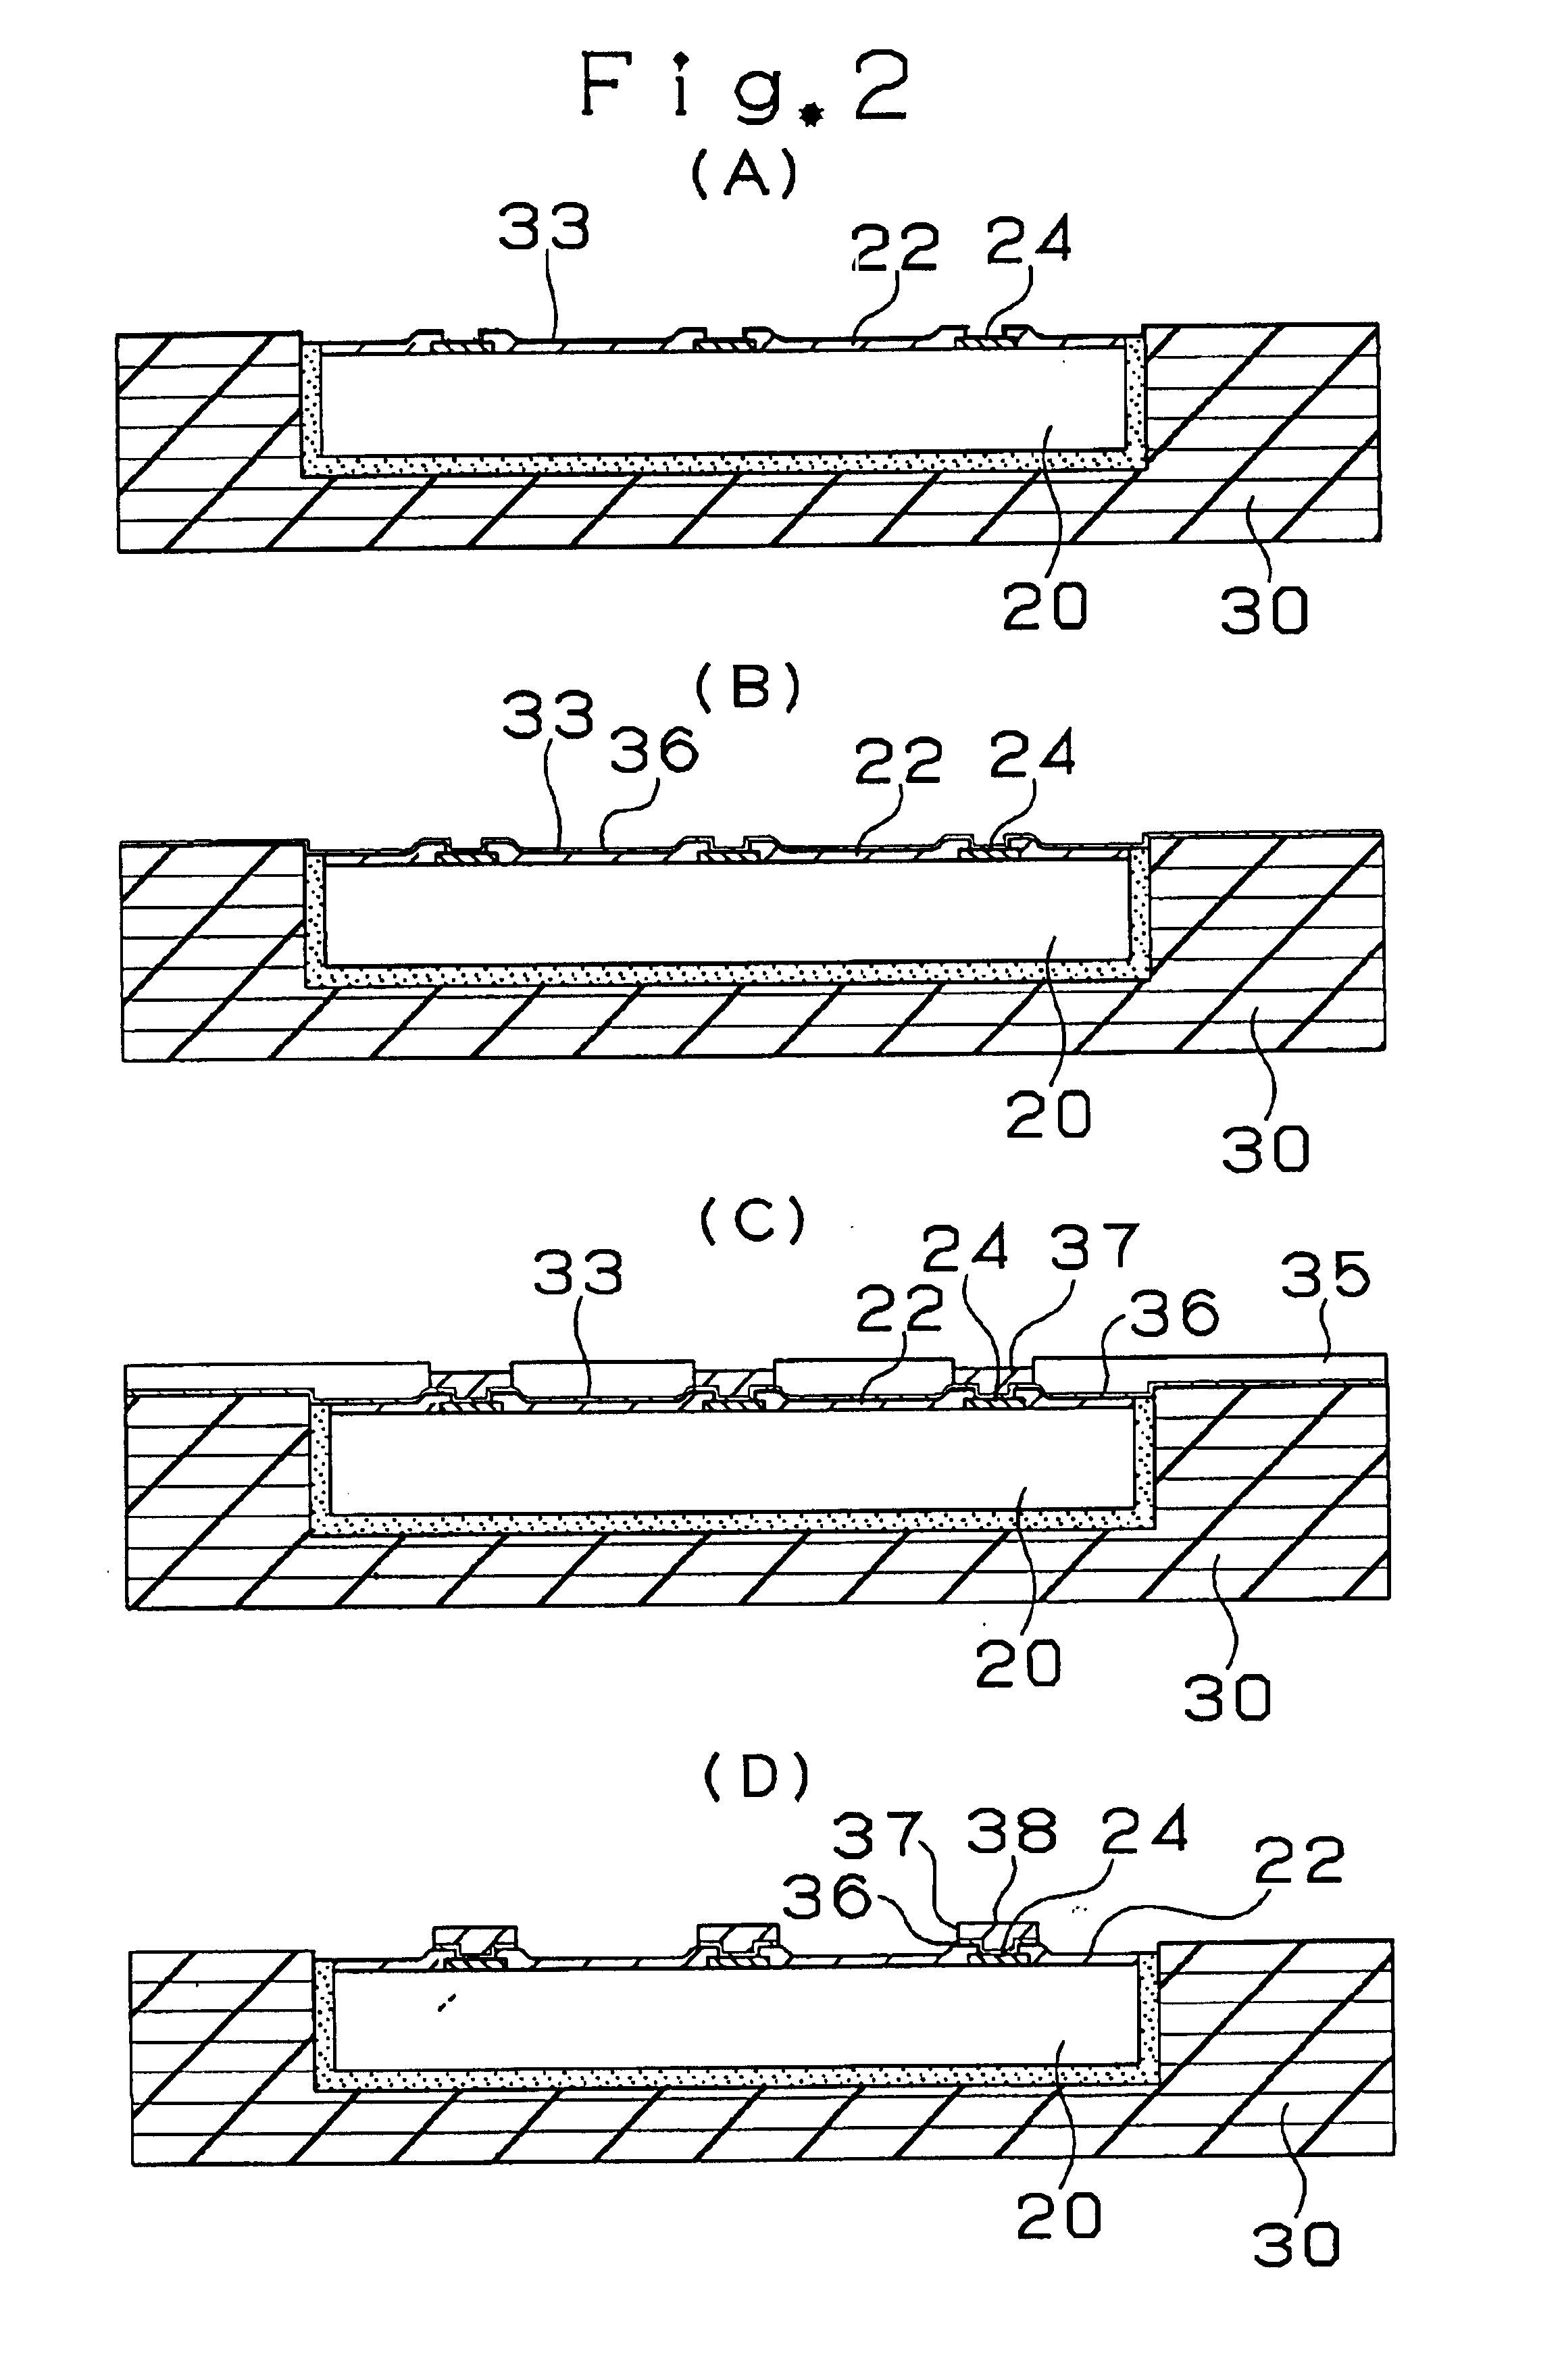 Multilayer printed wiring board and method for producing multilayer printed wiring board